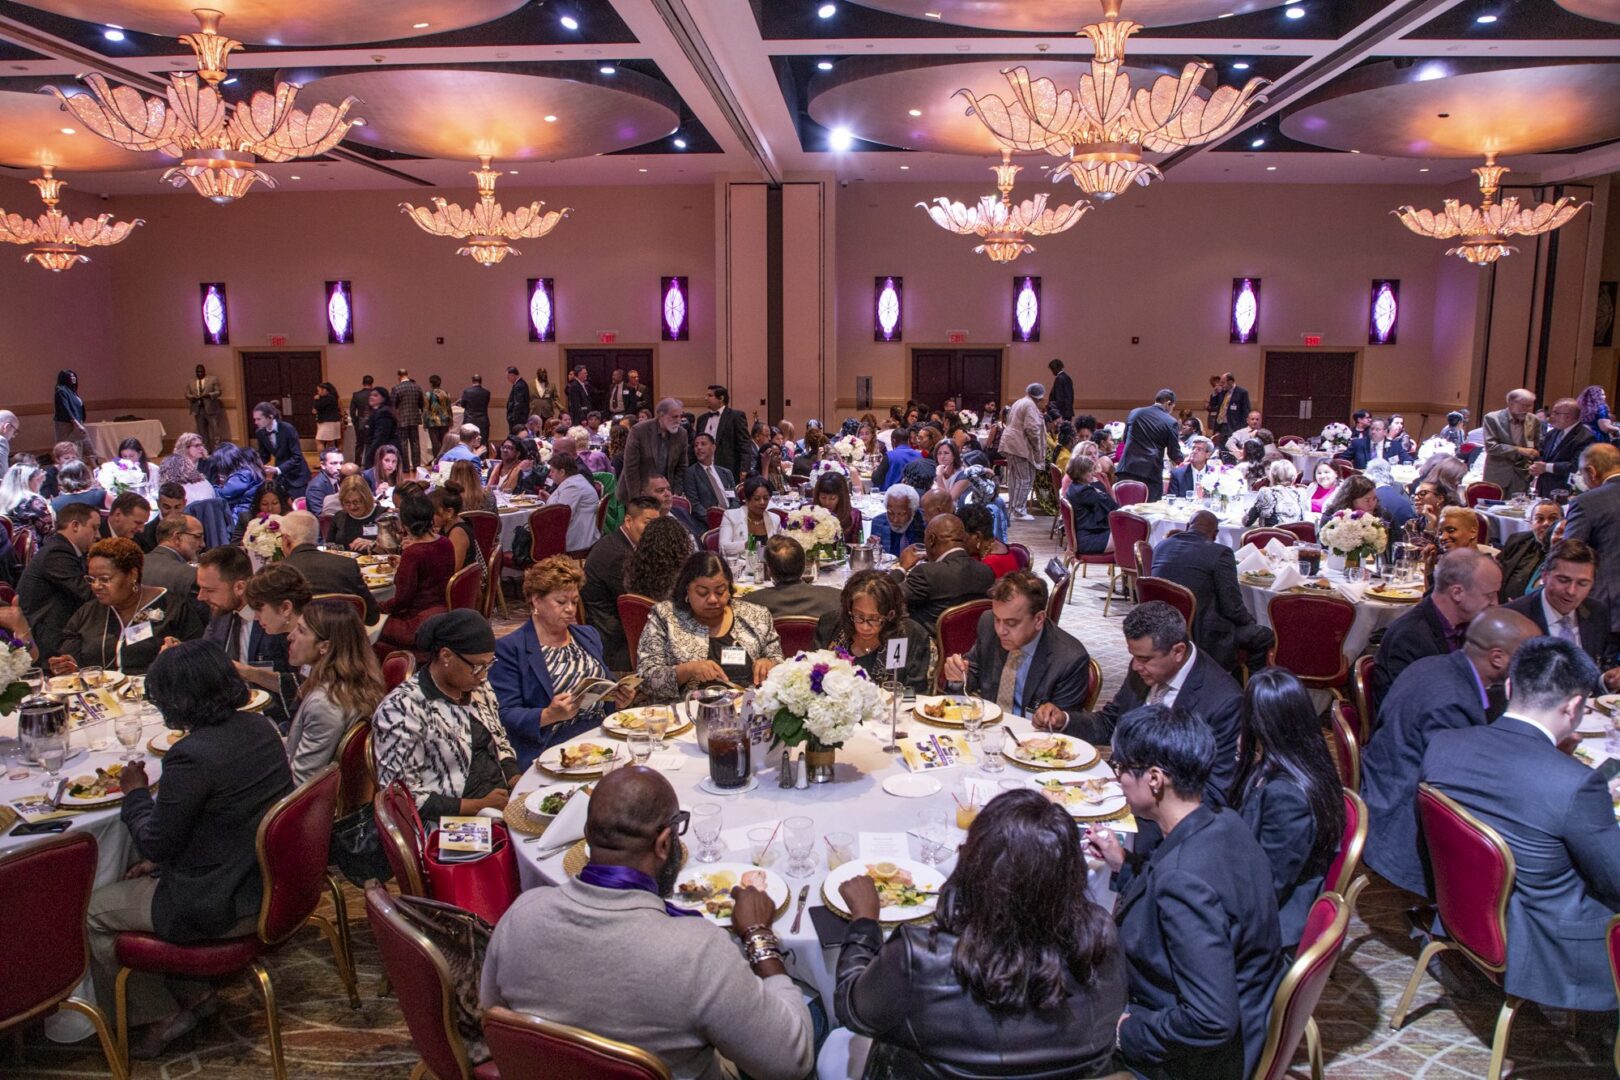 A large room full of people at a banquet.